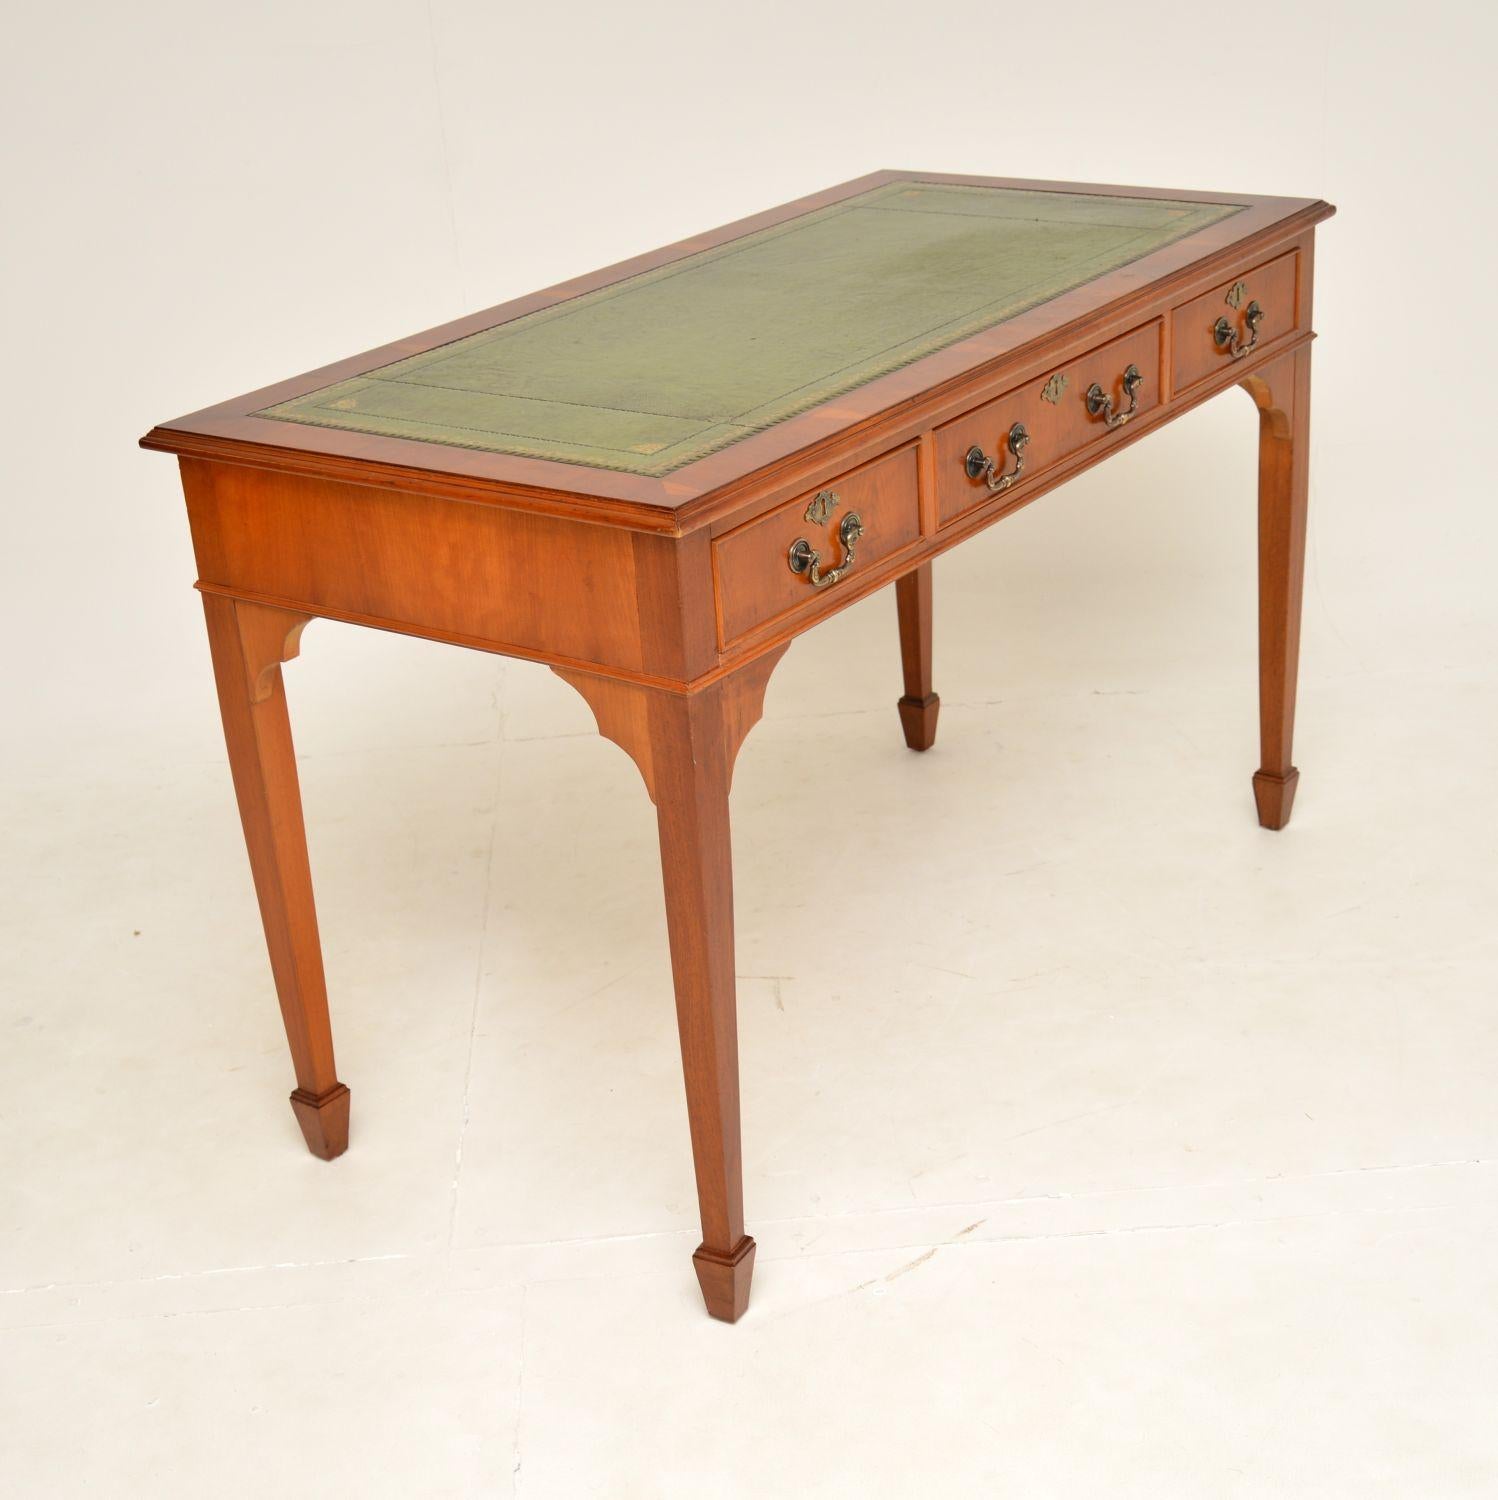 A very well made and great looking yew wood desk in the antique Georgian style. This was made in England, it dates from around the 1950’s.

It is a great size and is of very good quality. The yew wood has a lovely colour tone and beautiful grain